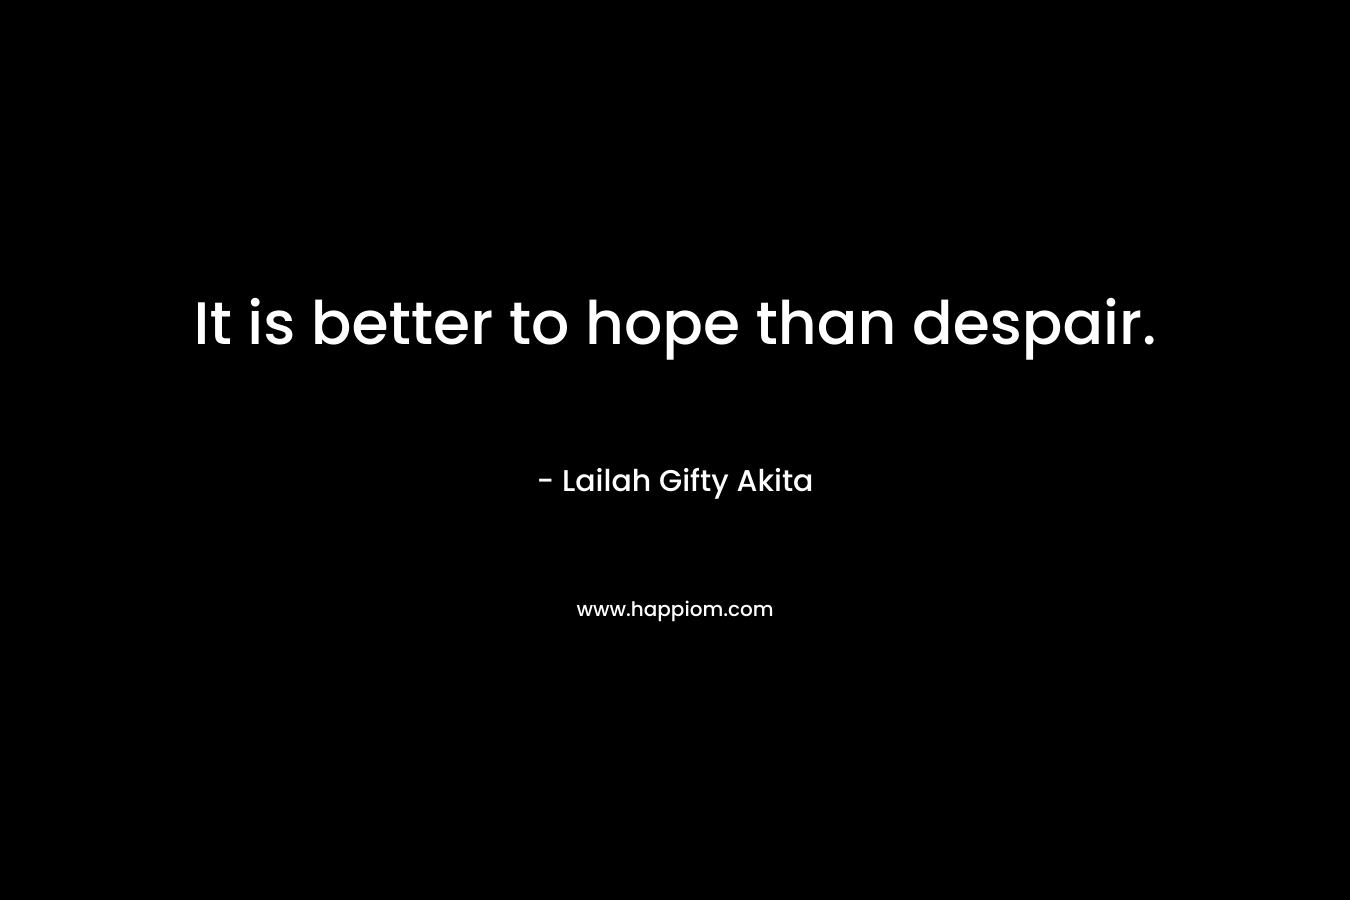 It is better to hope than despair.